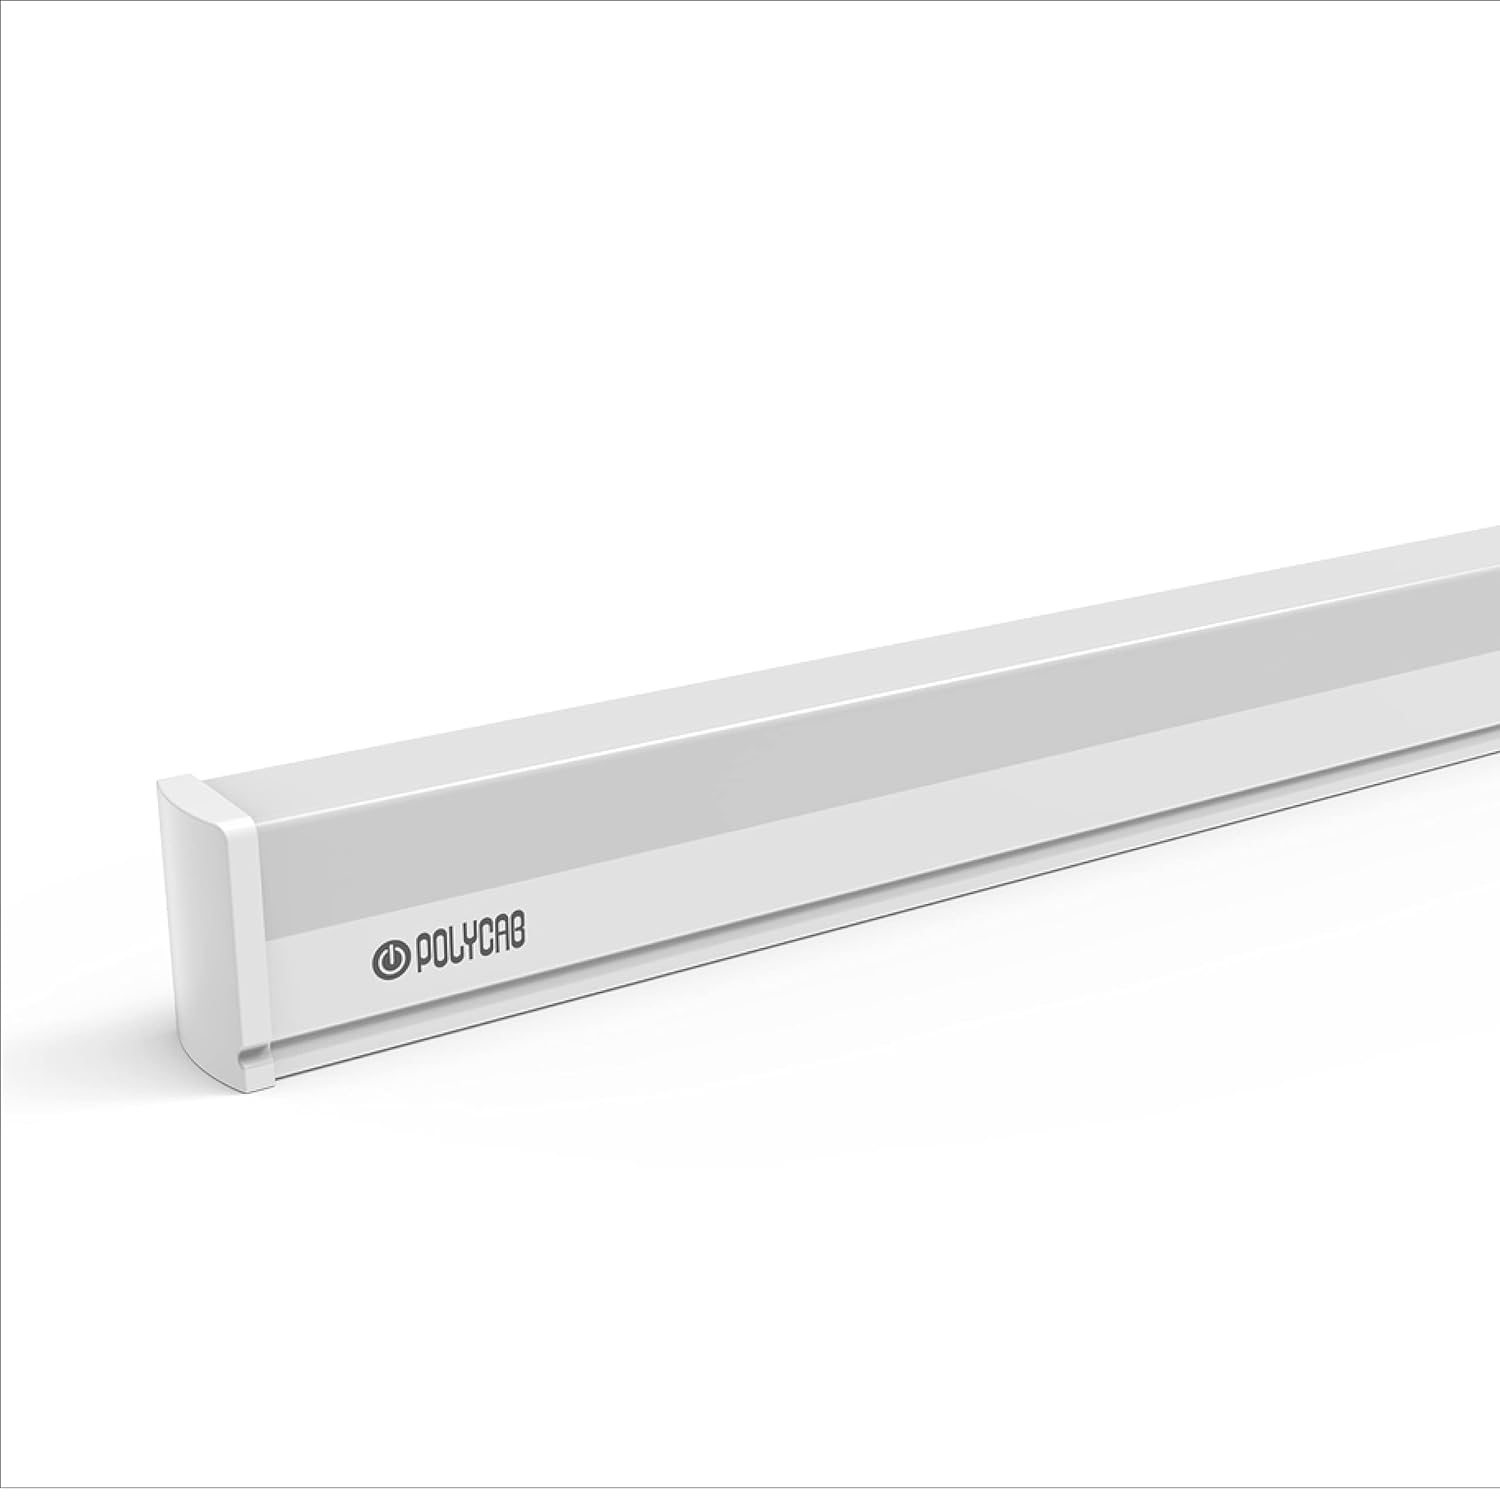 Polycab 12W Intenso  LXS LED Batten in Square Shape, Energy-efficient Light with Cool White 2 feet L